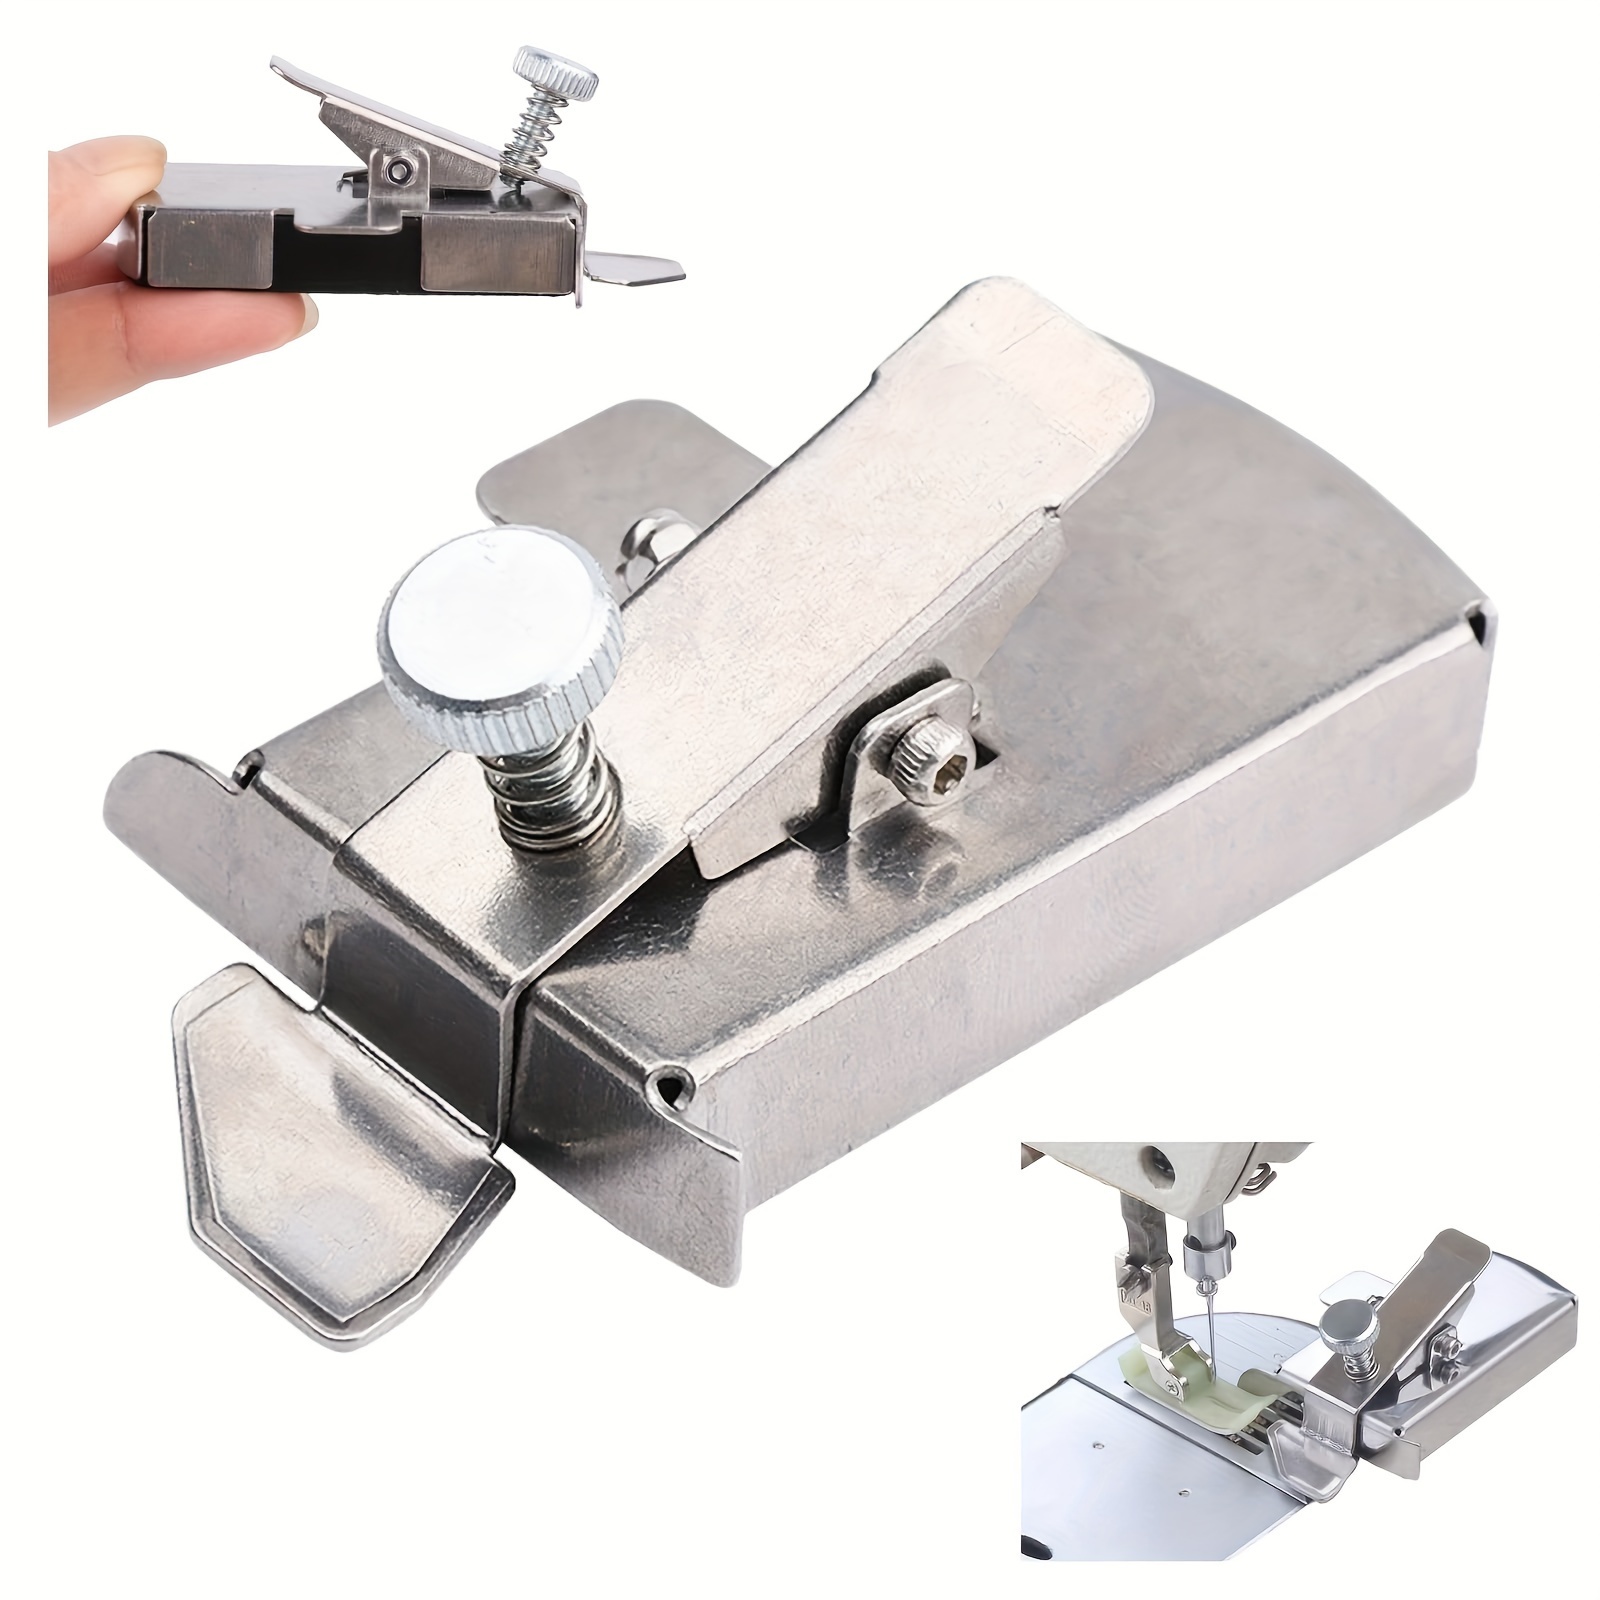 Multi-functional Magnetic Seam Guide For Sewing Machine Presser